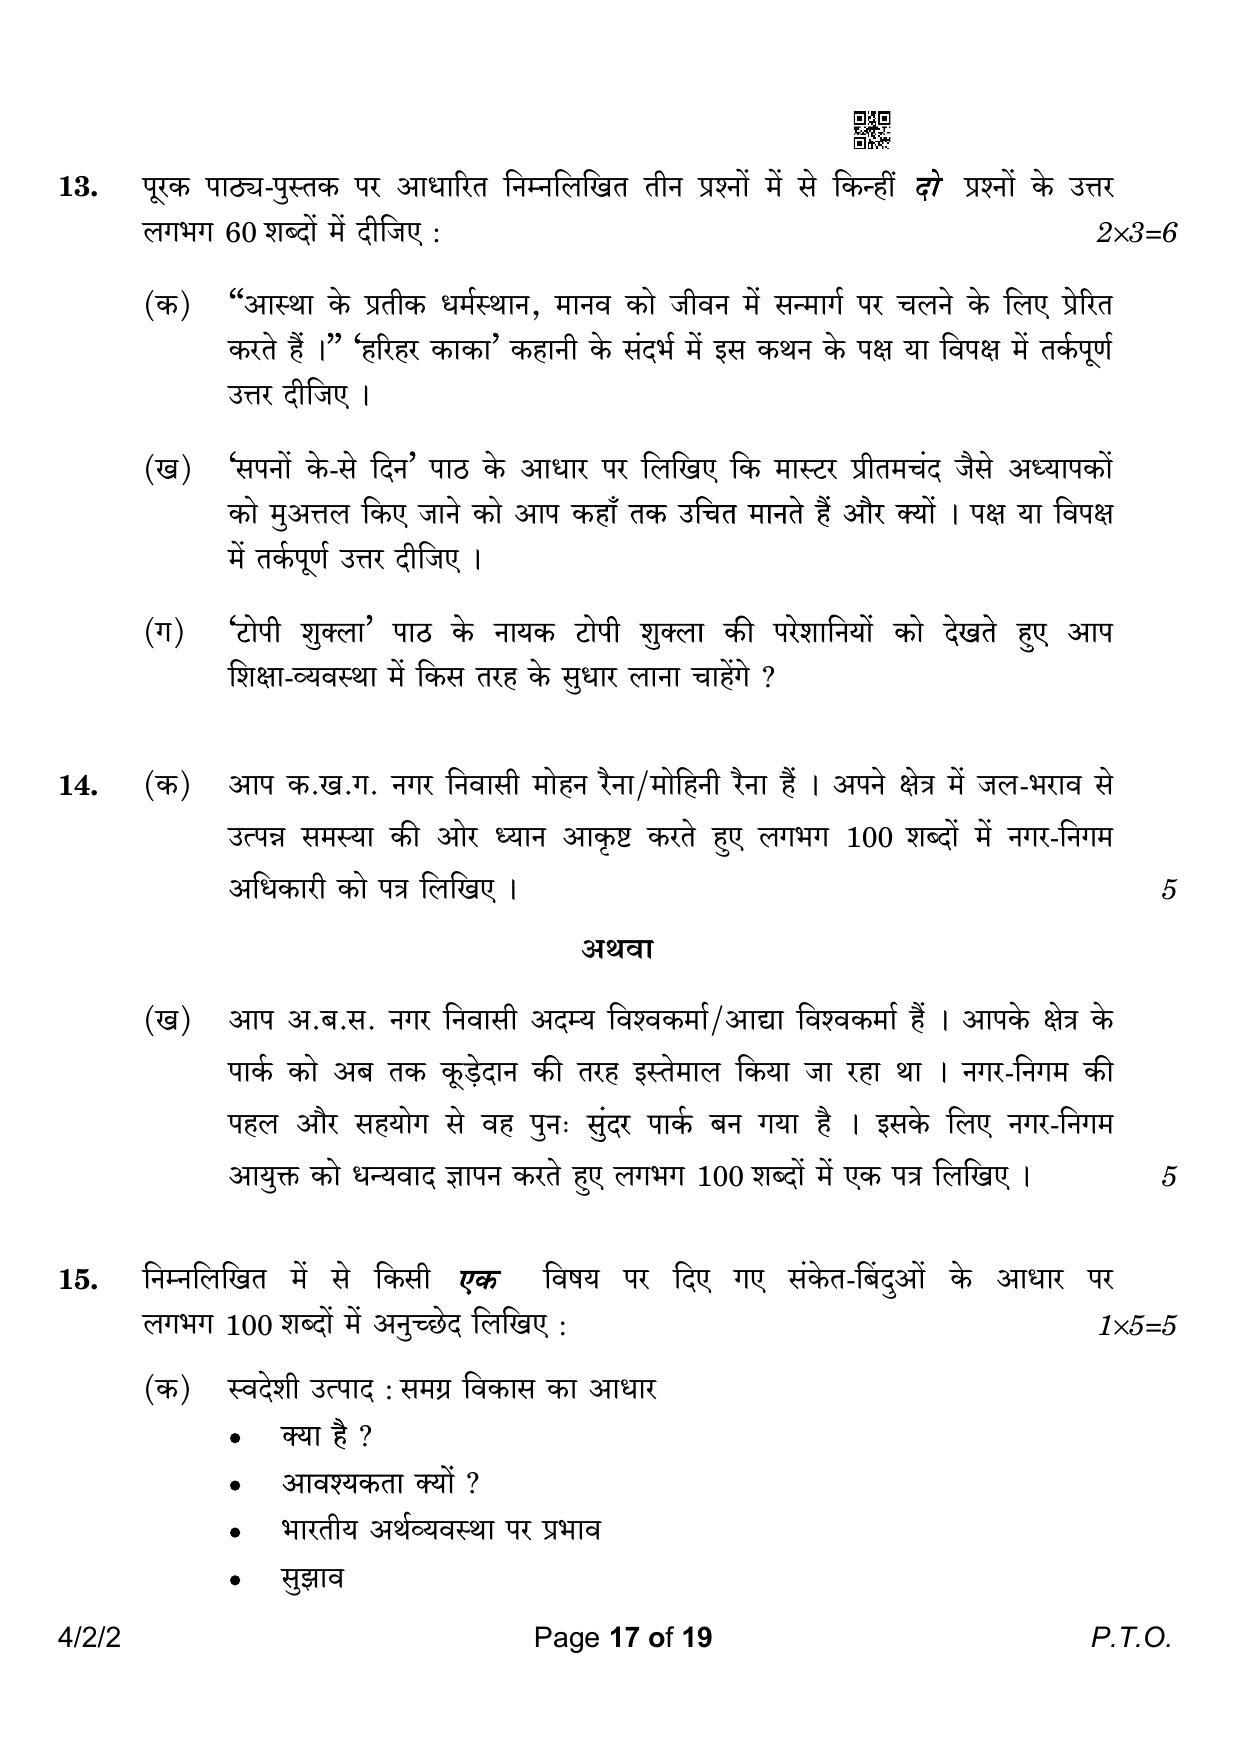 CBSE Class 10 4-2-2 Hindi B 2023 Question Paper - Page 17